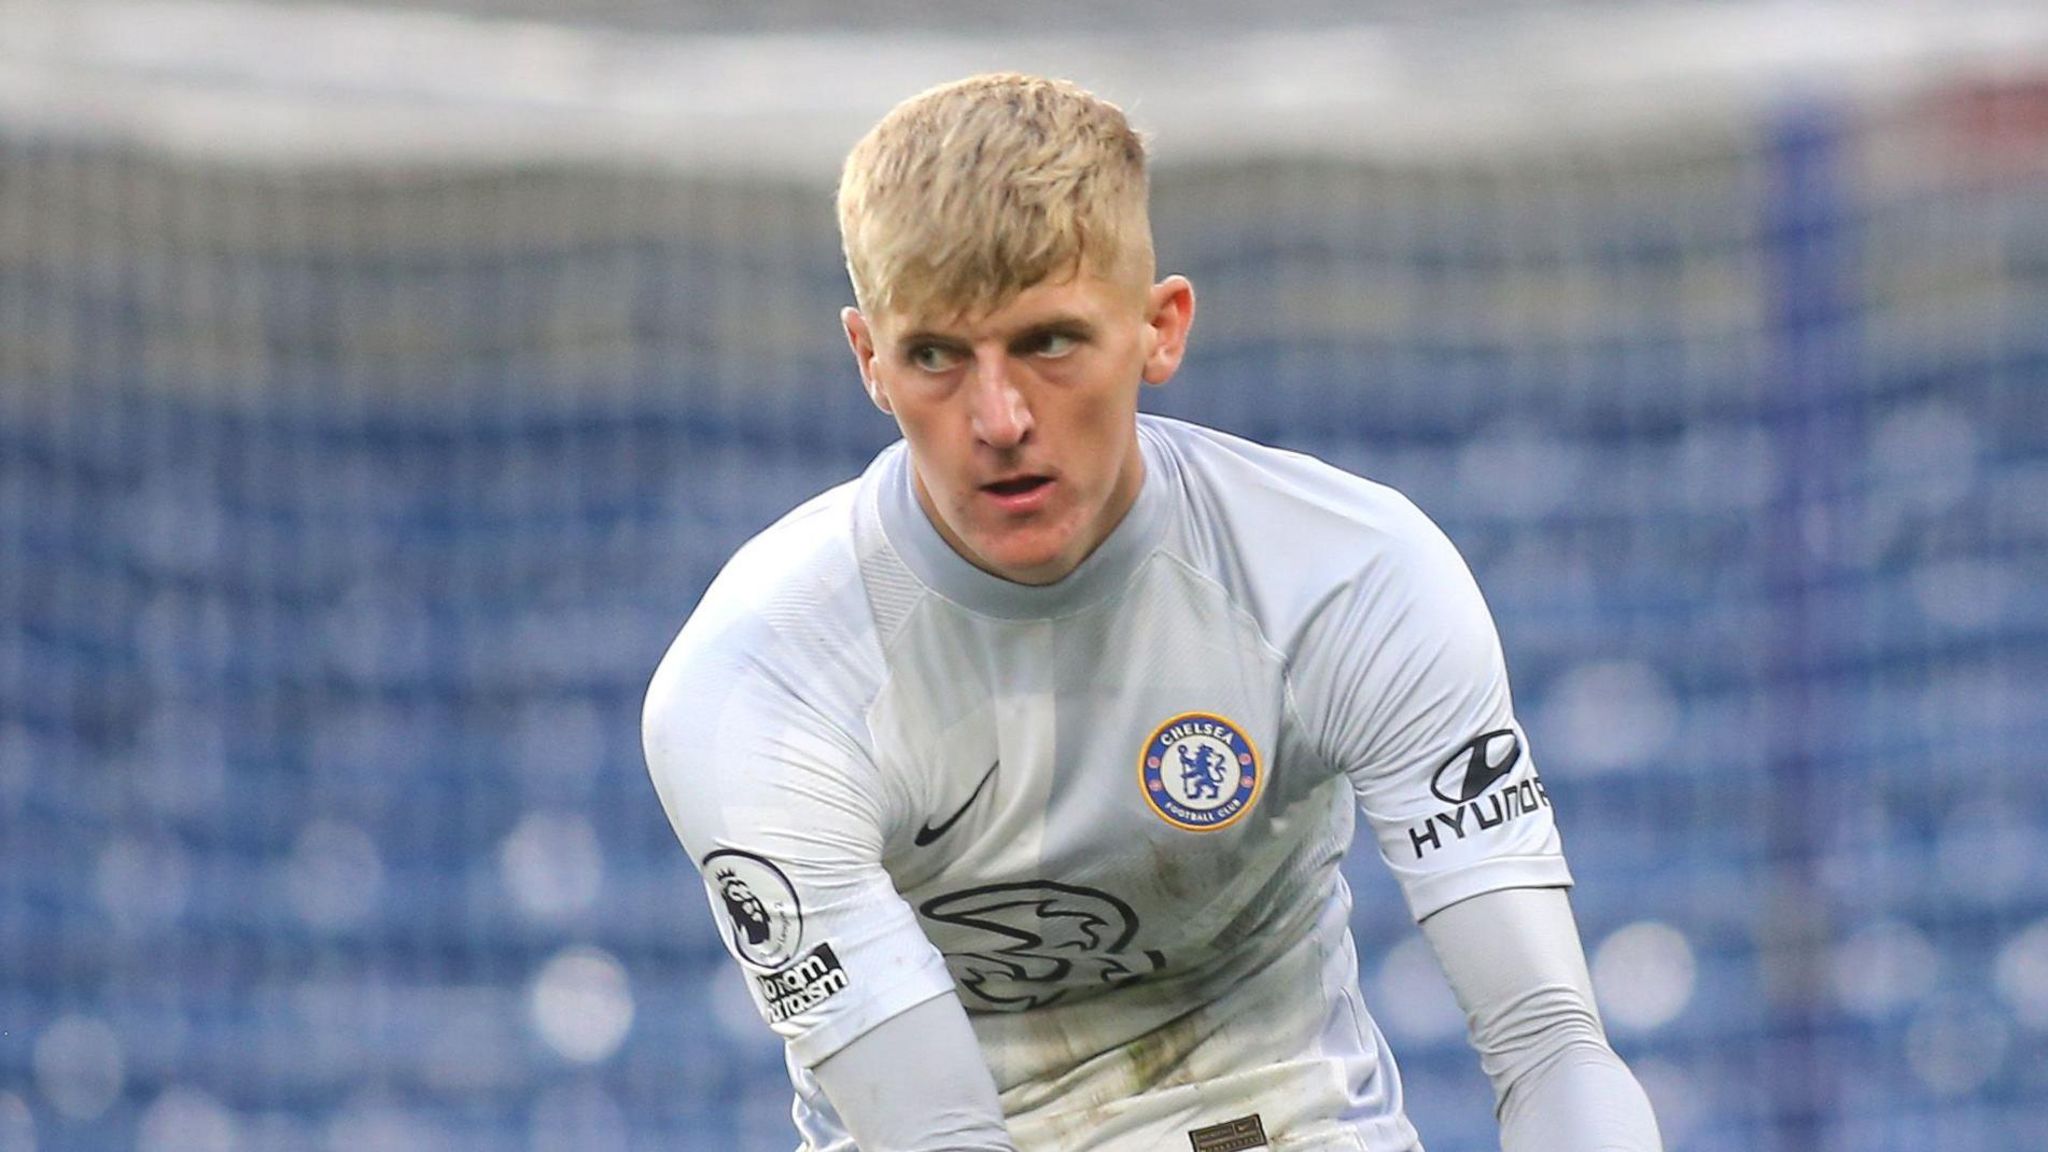 Ted Sharman-Lowe playing for Chelsea's Under-23s team 